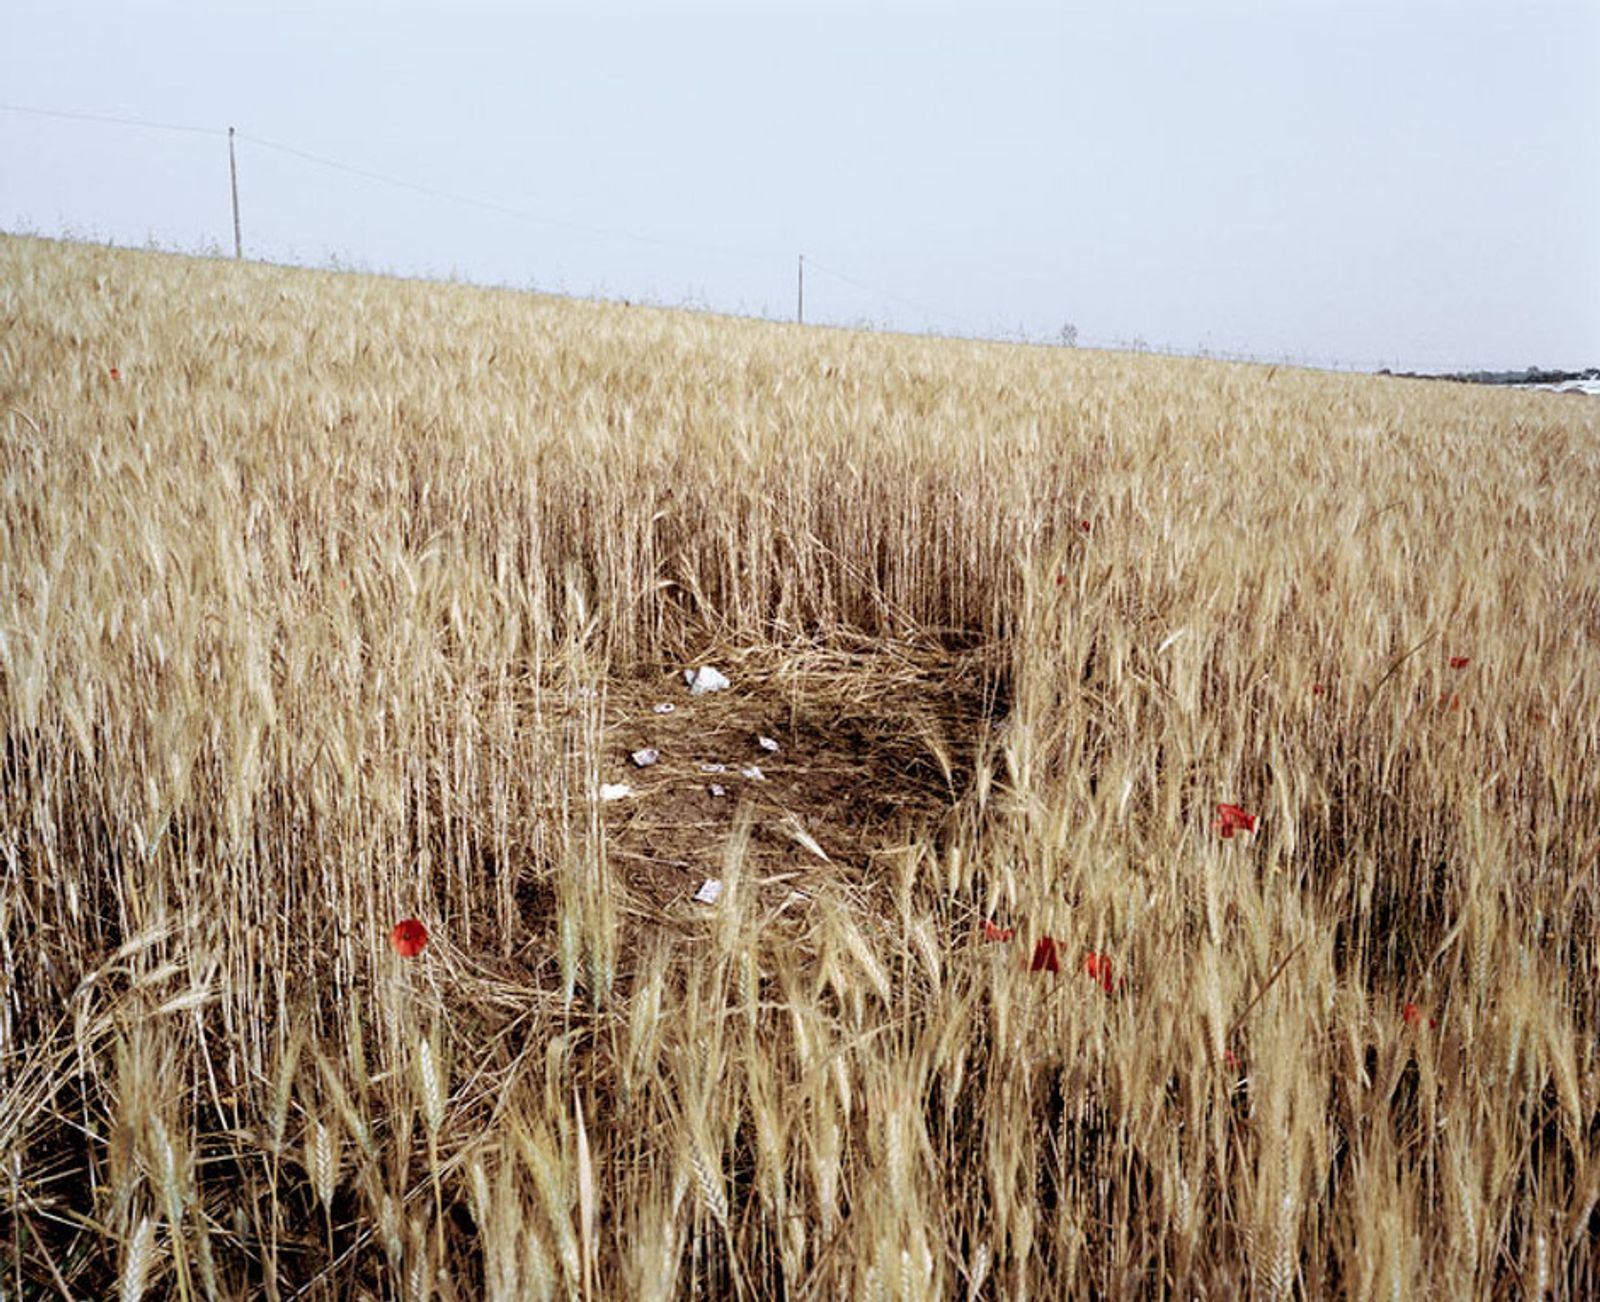 © Paolo Patrizi - A wheat field used by sex workers along a country road, Rome, Italy